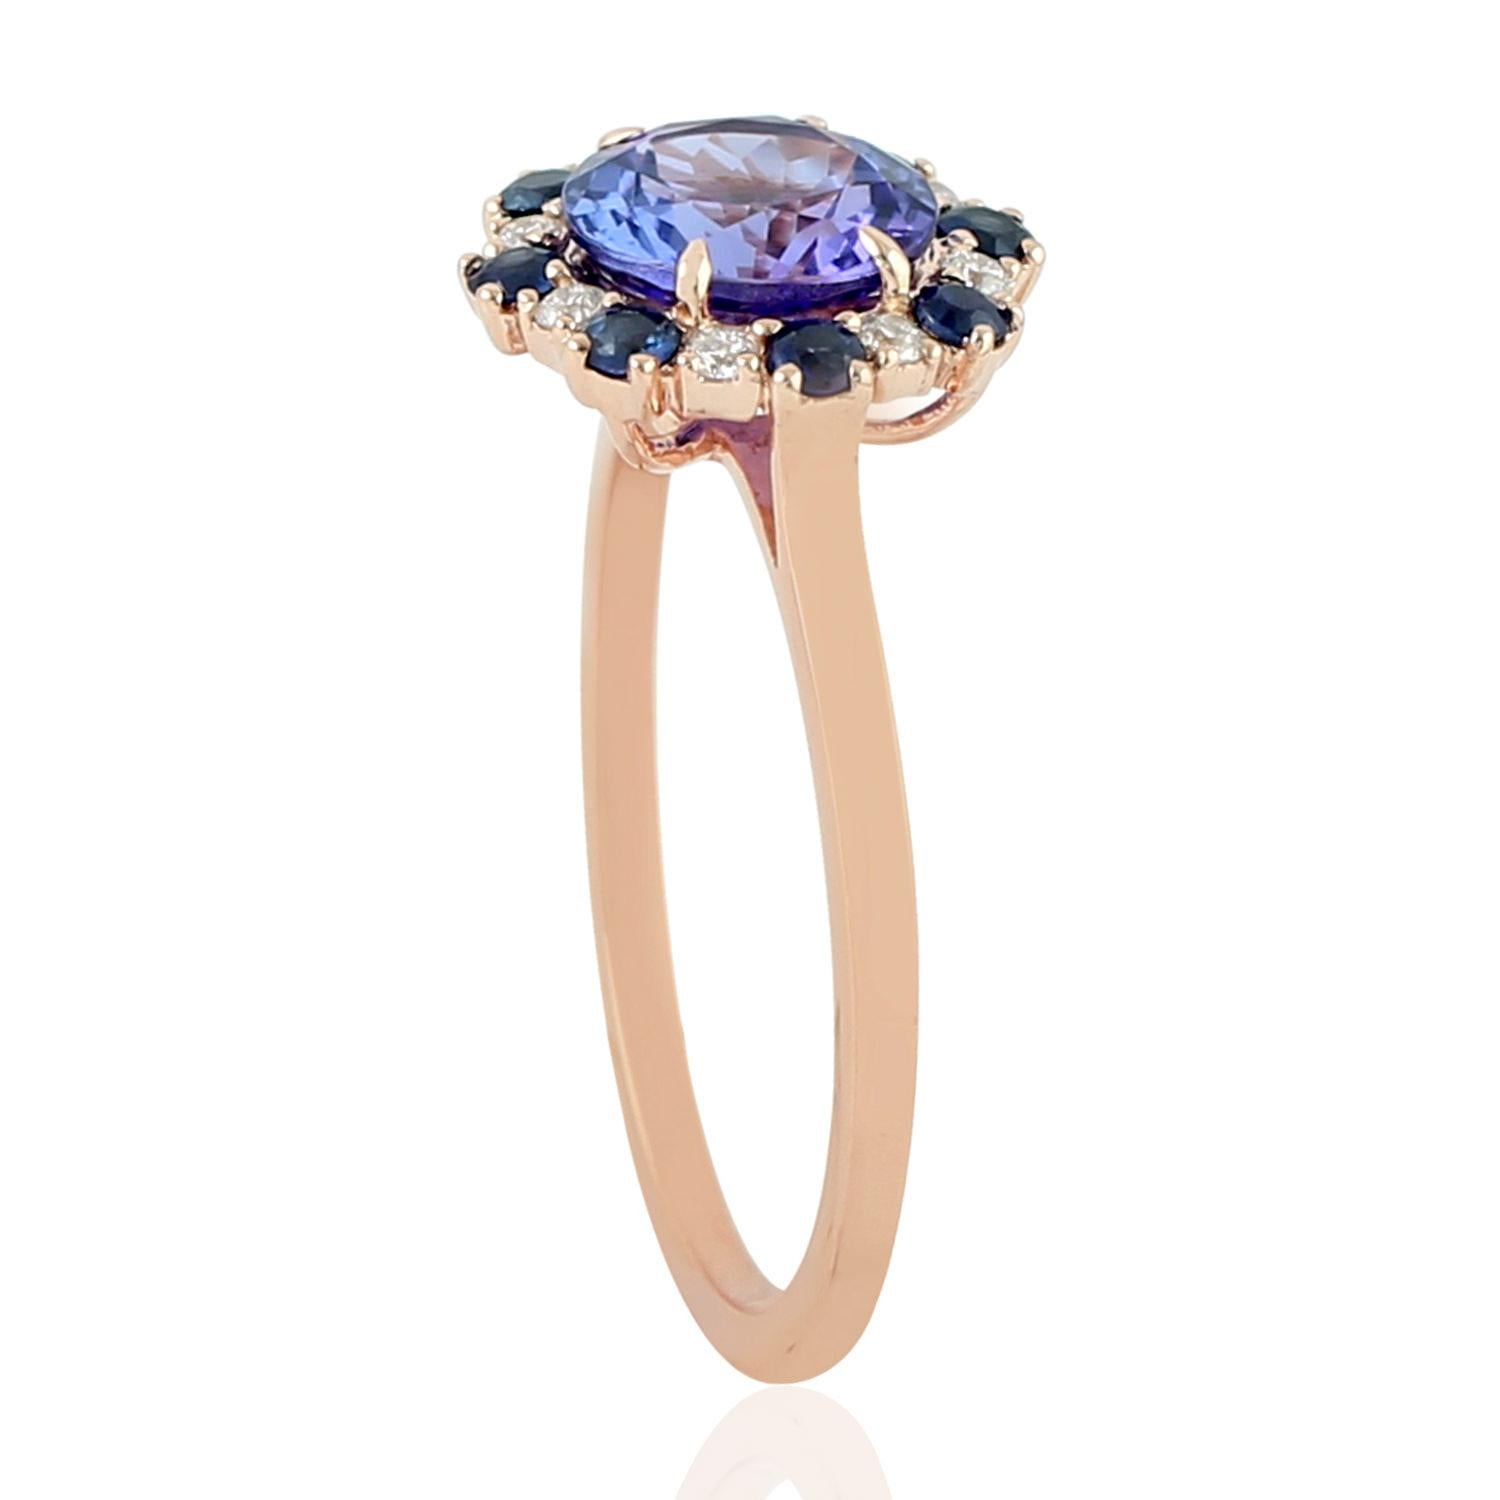 Mixed Cut Tanzanite Cocktail Ring With Blue Sapphire & Diamonds Made In 18k Rose Gold For Sale